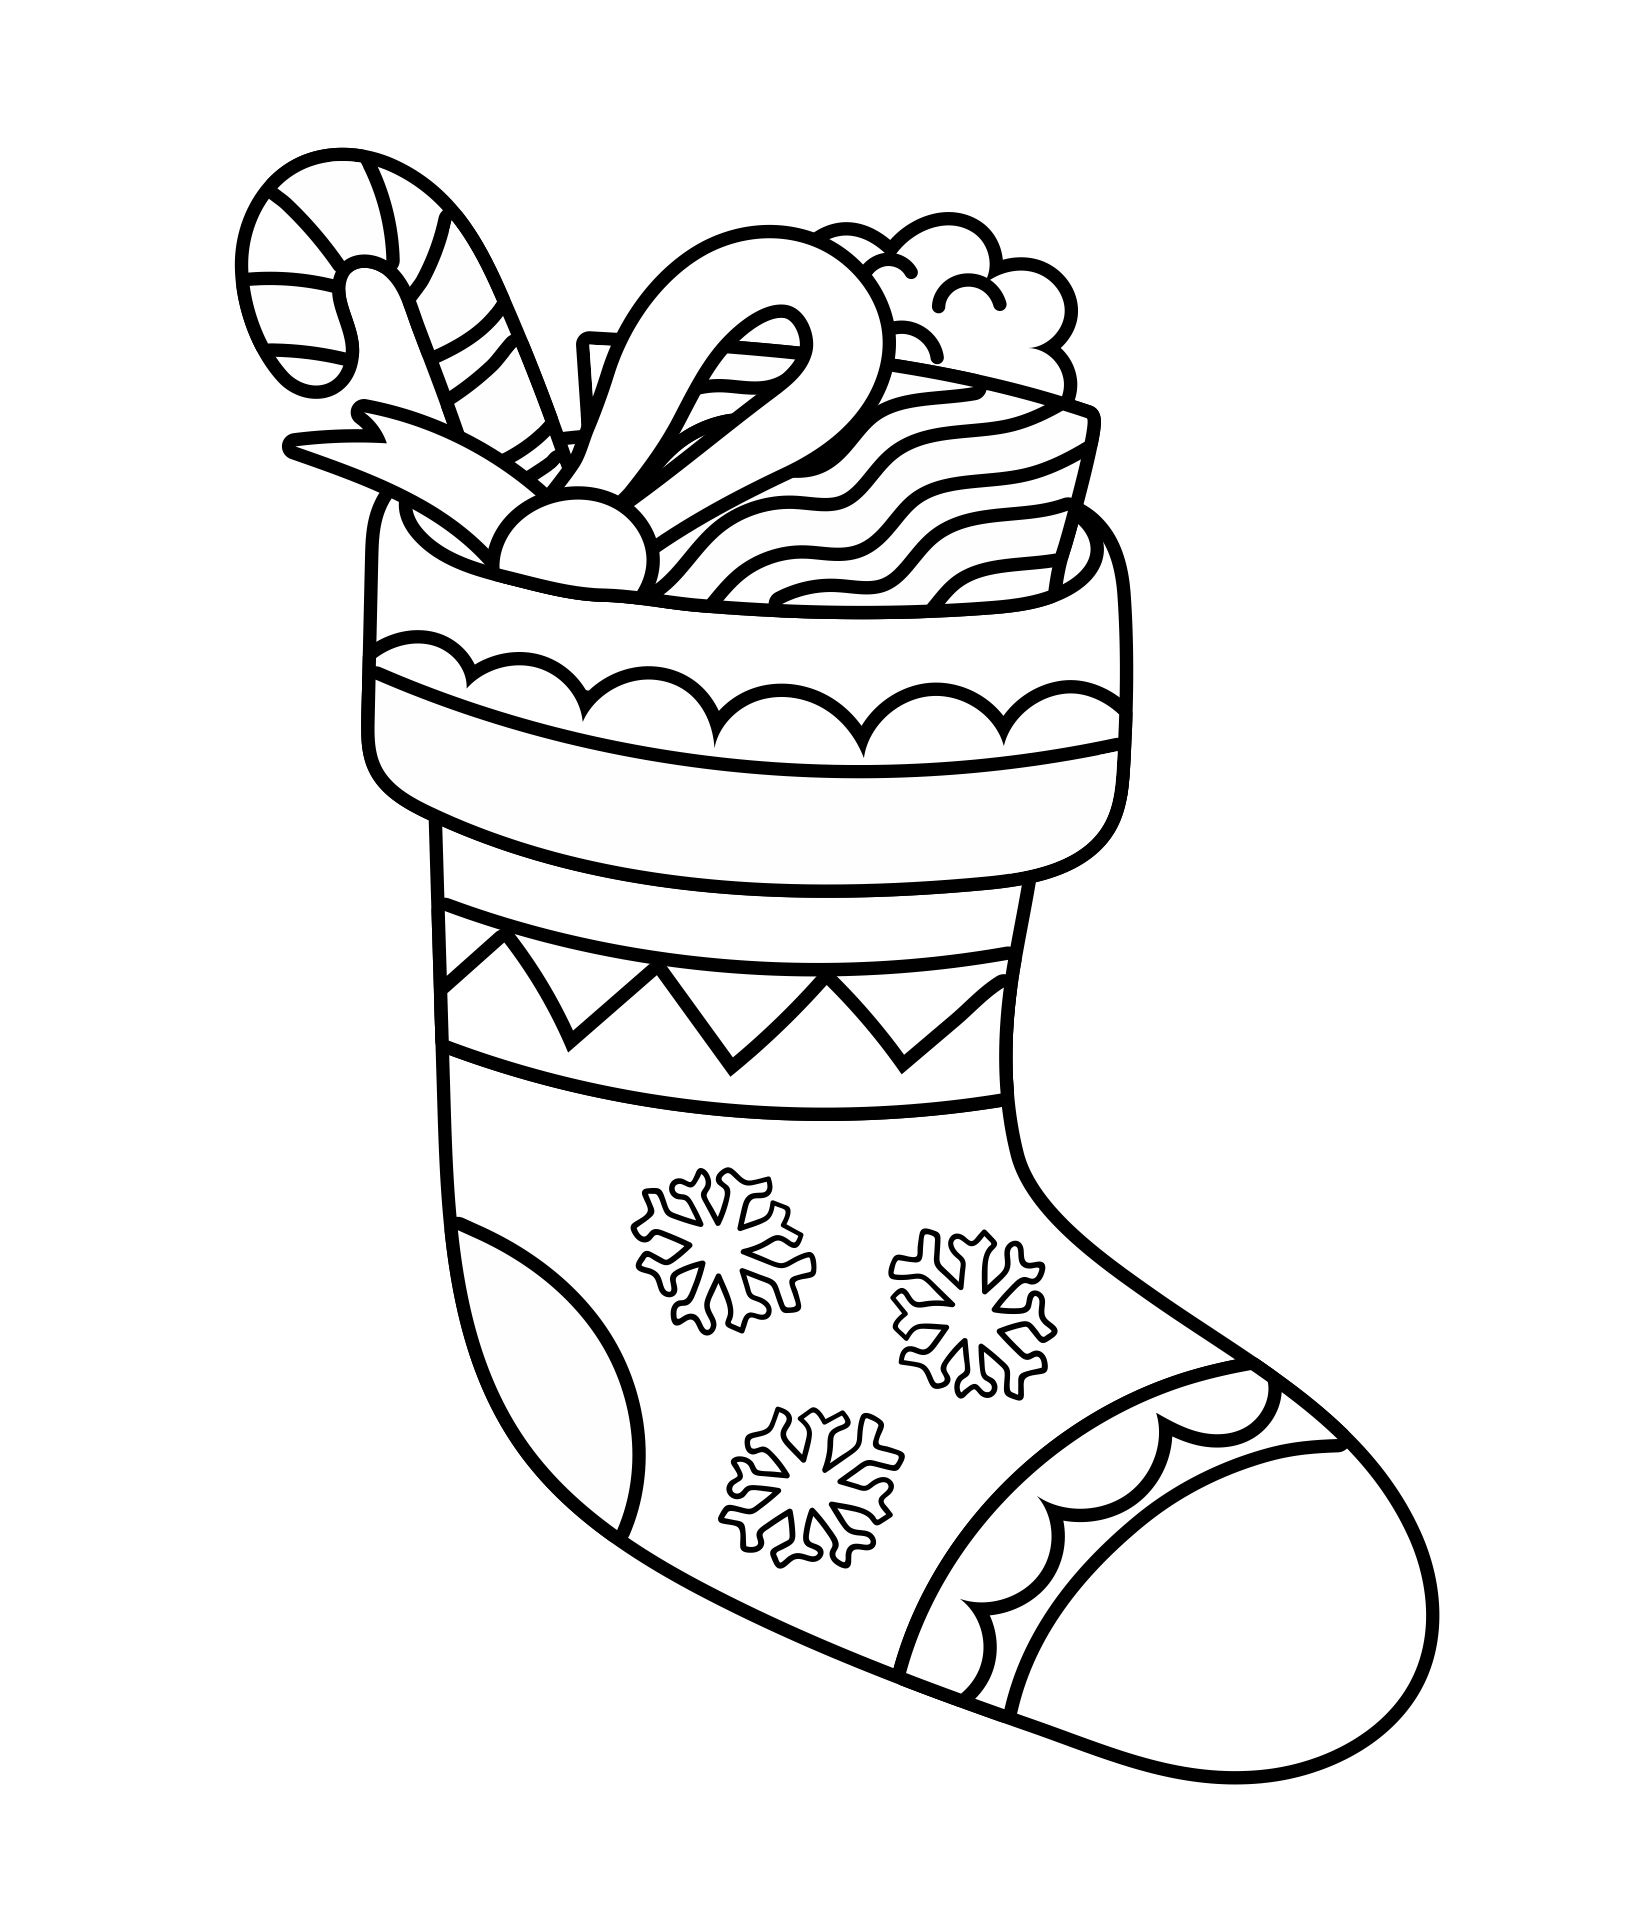 Printable Filled Christmas Stocking Coloring Page